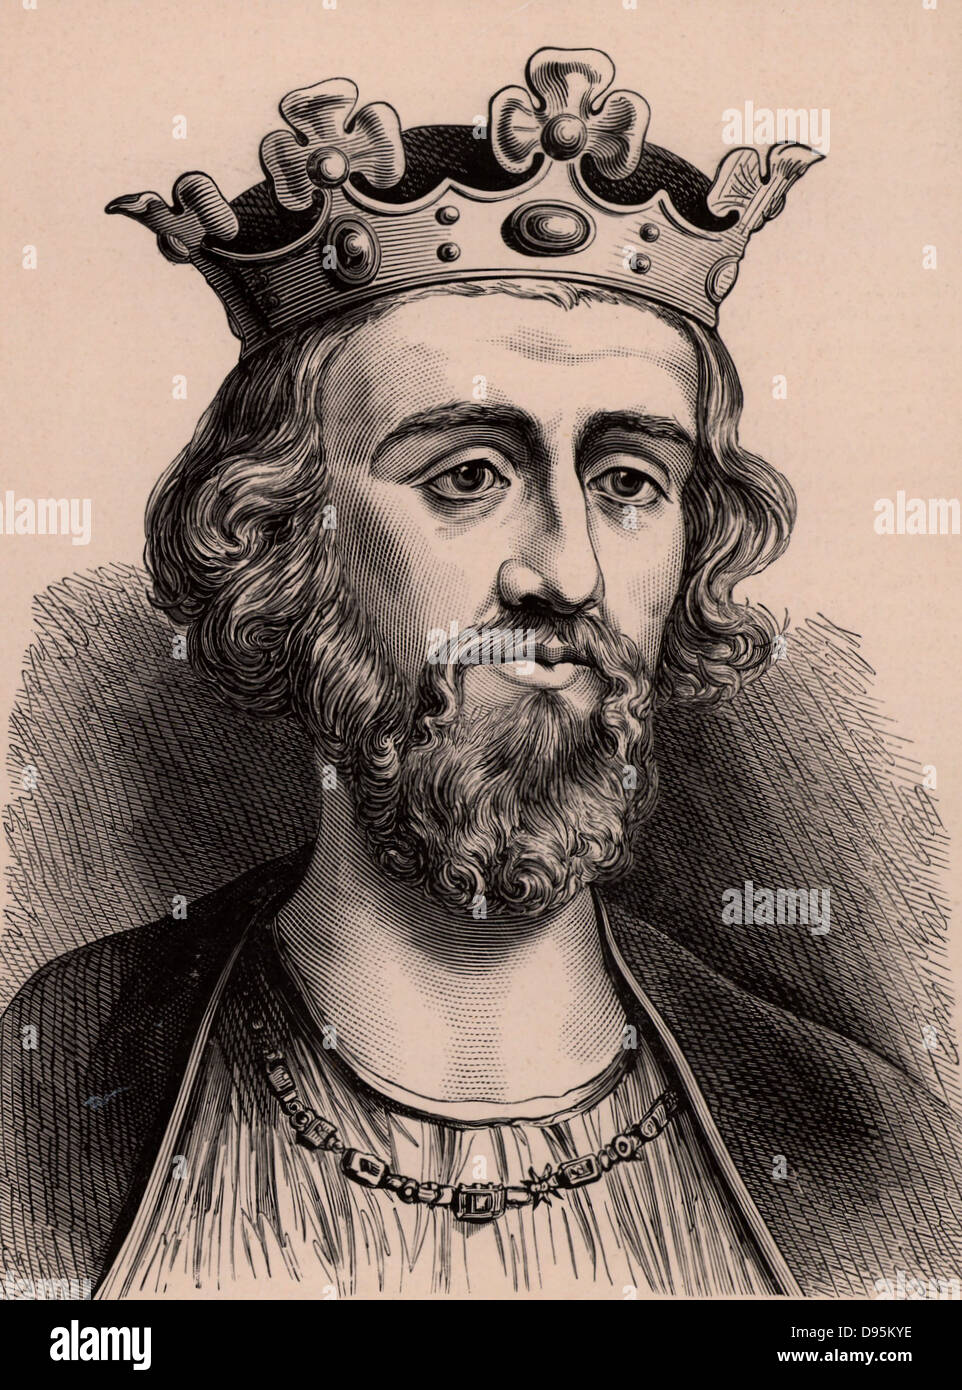 Edward II (1284-1327) king of England from 1307, son of Edward I and Eleanor of Castile. Created Prince of Wales in 1301. Forced to abdicate and murdered in Berkeley Castle in 1307. A member of the Plantagenet dynasty. Wood engraving c1900. Stock Photo